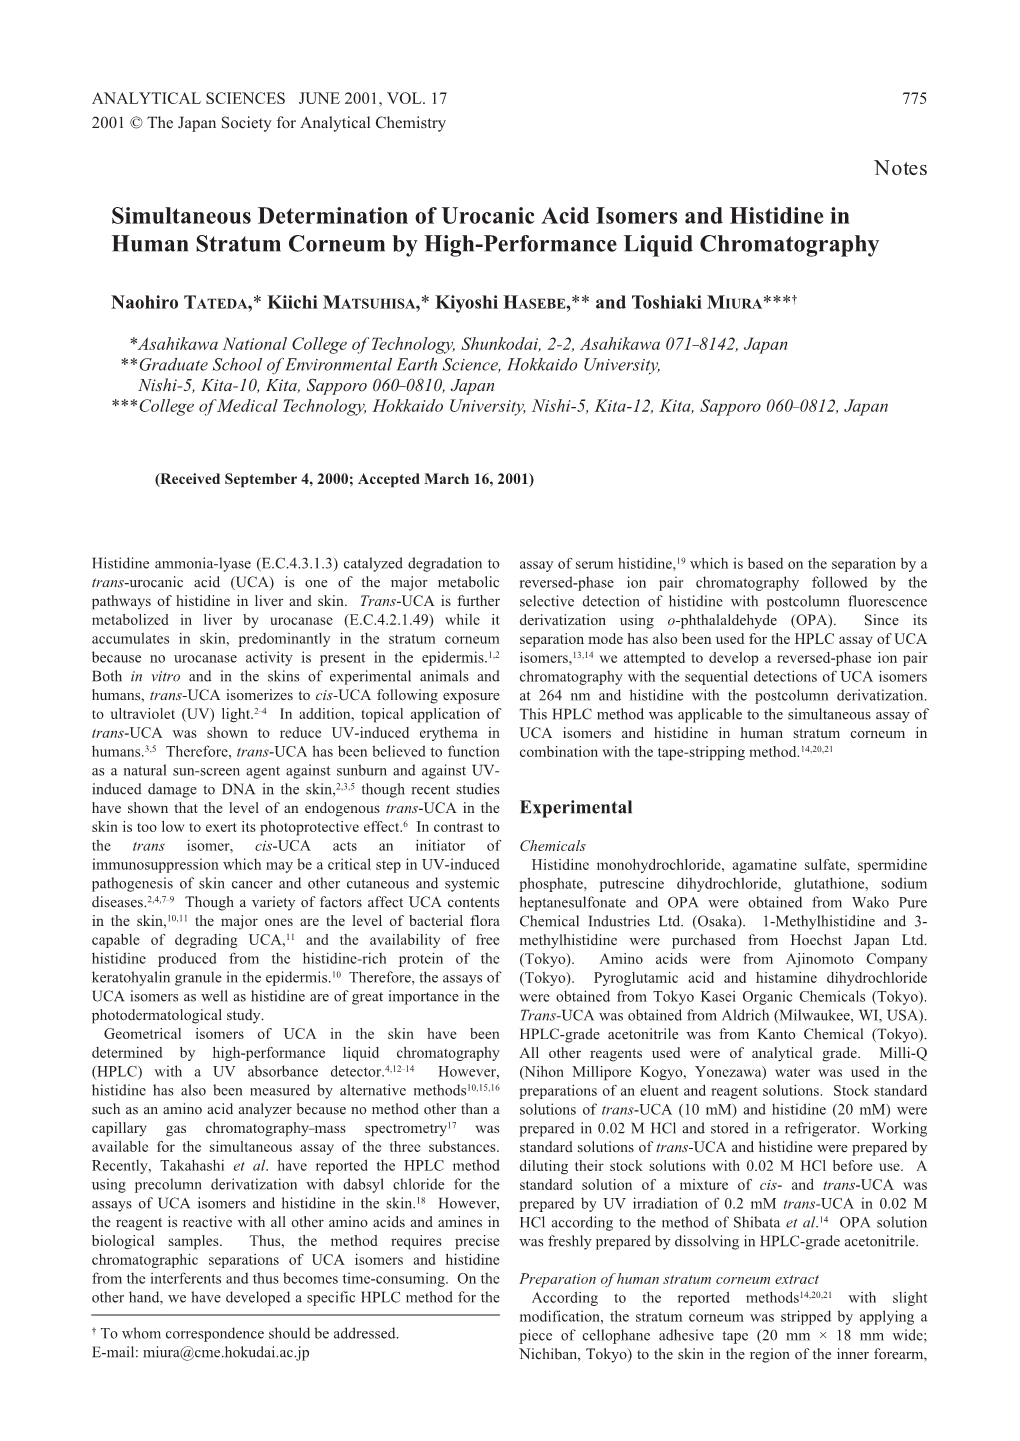 Simultaneous Determination of Urocanic Acid Isomers and Histidine in Human Stratum Corneum by High-Performance Liquid Chromatography